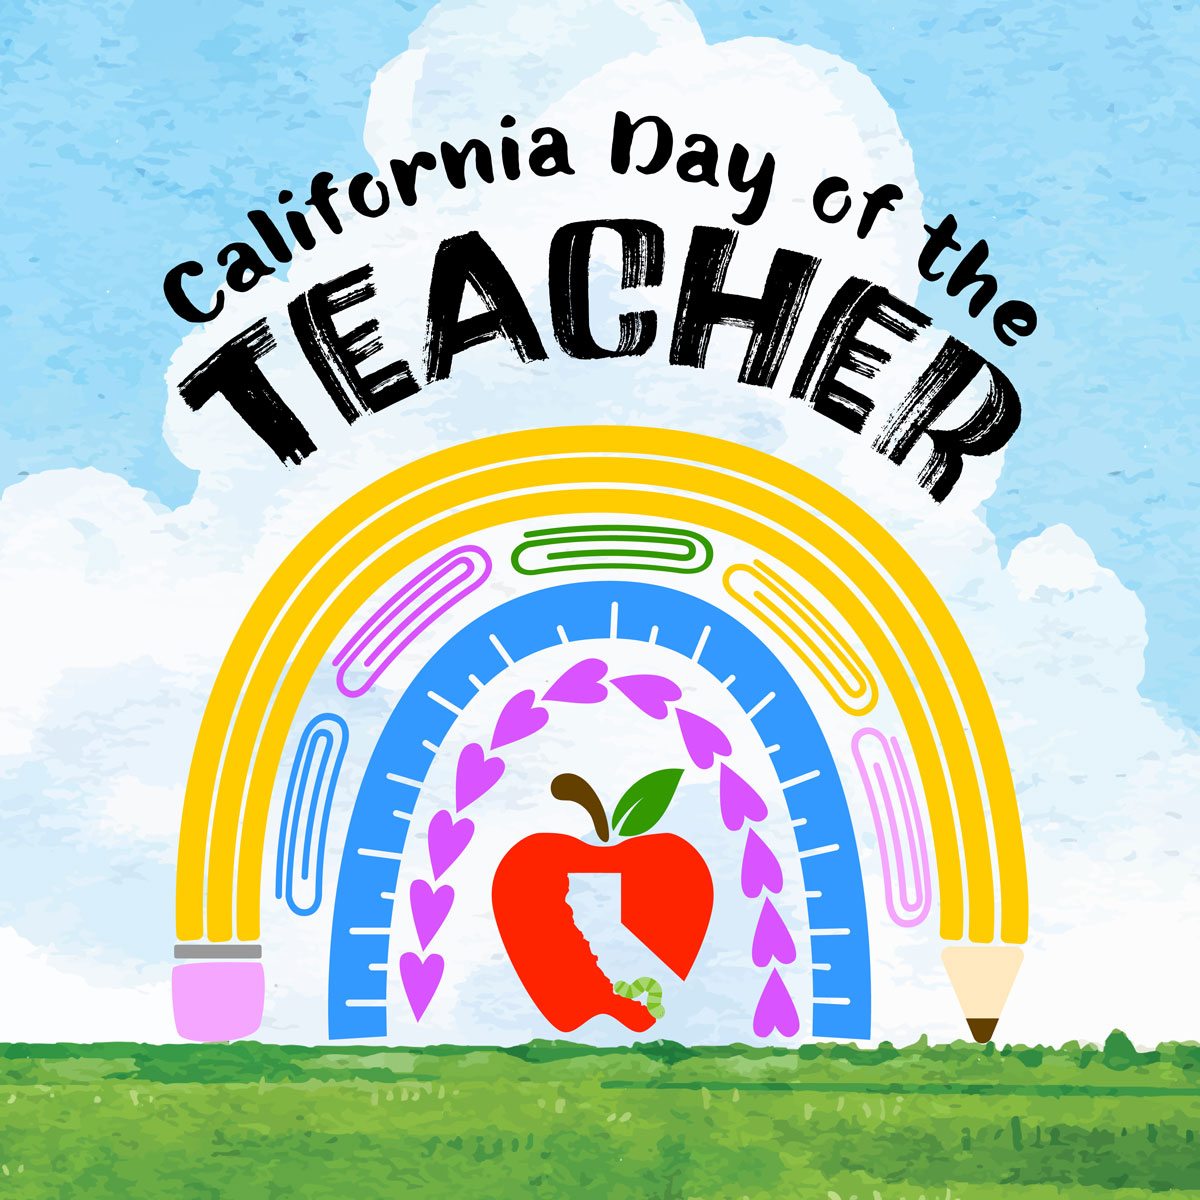 Today is California Day of the Teacher and I want to extend my sincerest gratitude to all of our teachers in the Golden State. You all are shaping the lives of the next generation's leaders and I am so thankful for your hard work and dedication.👩‍🏫📚